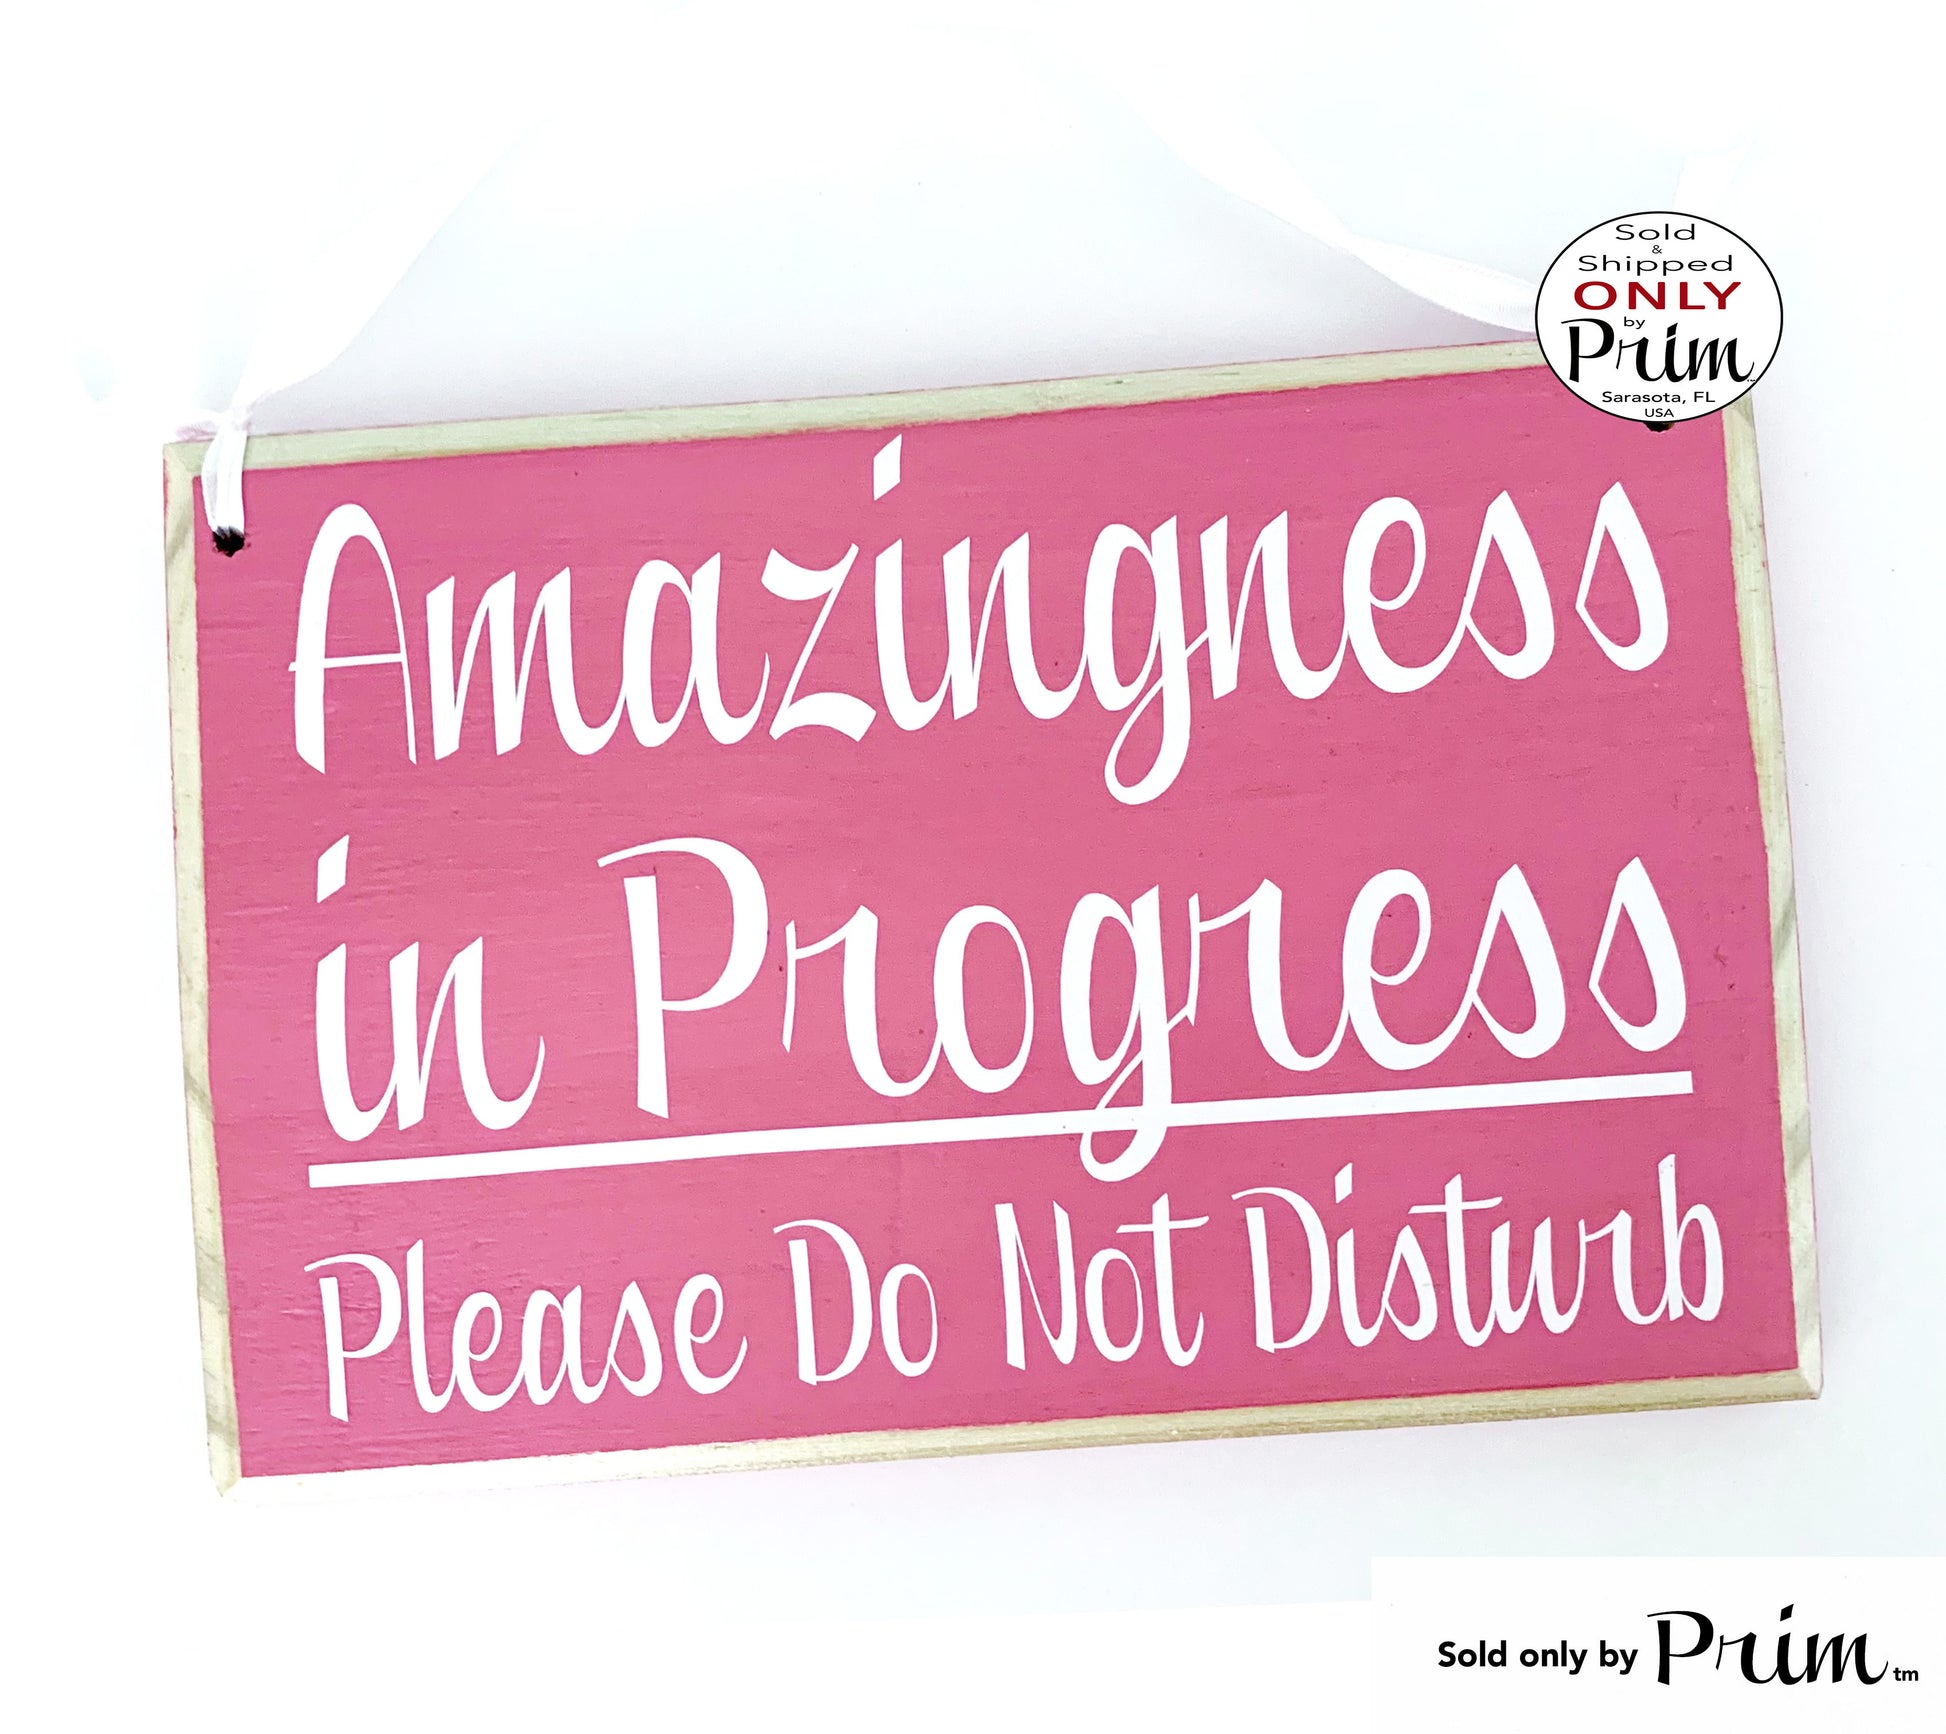 Designs by Prim 8x6 Amazingness in Progress Please Do Not Disturb Custom Wood Sign Focus Time Work Progress Home Office Working Busy Session Door Plaque